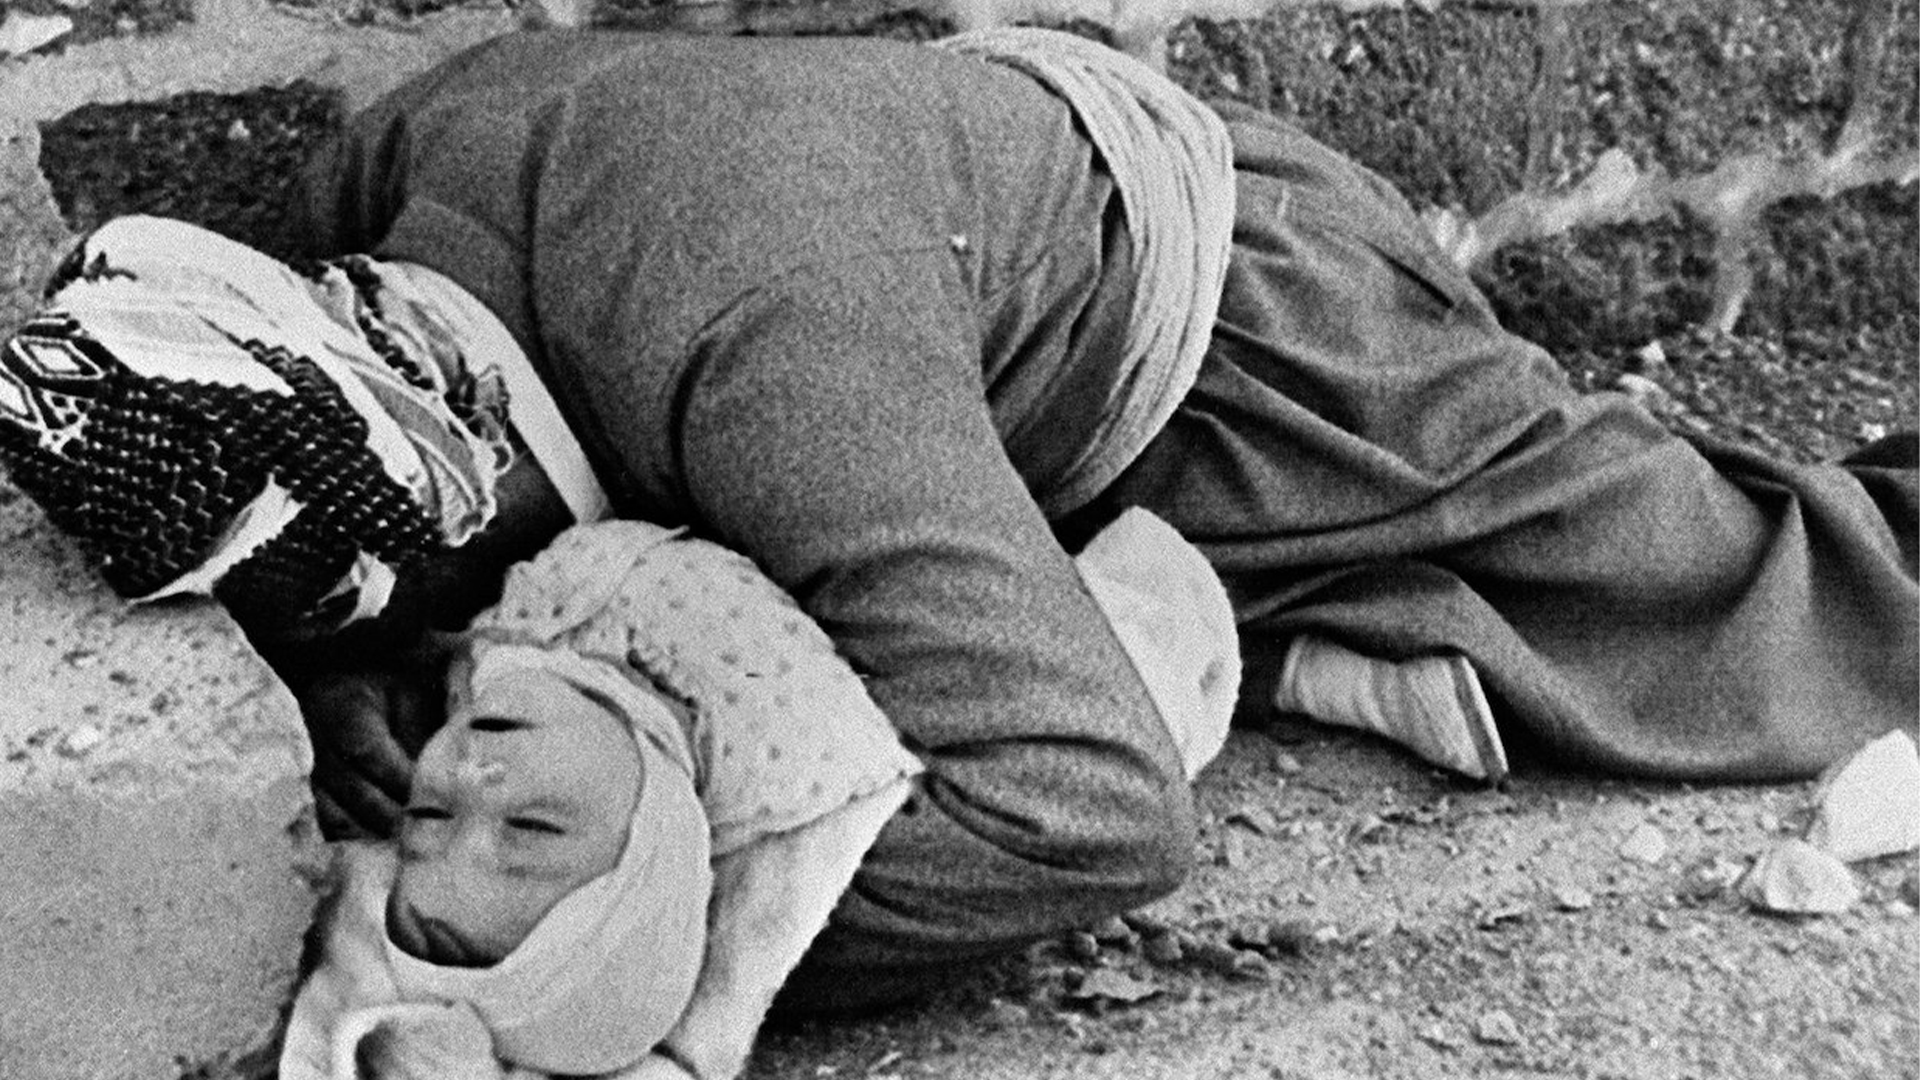  In the picture dated 20 March 1988, Omar Khawar, a Kurdish father, holds his baby in his arms in Halabja, Kurdistan Region. Both were killed in an Iraqi chemical attack on the city.